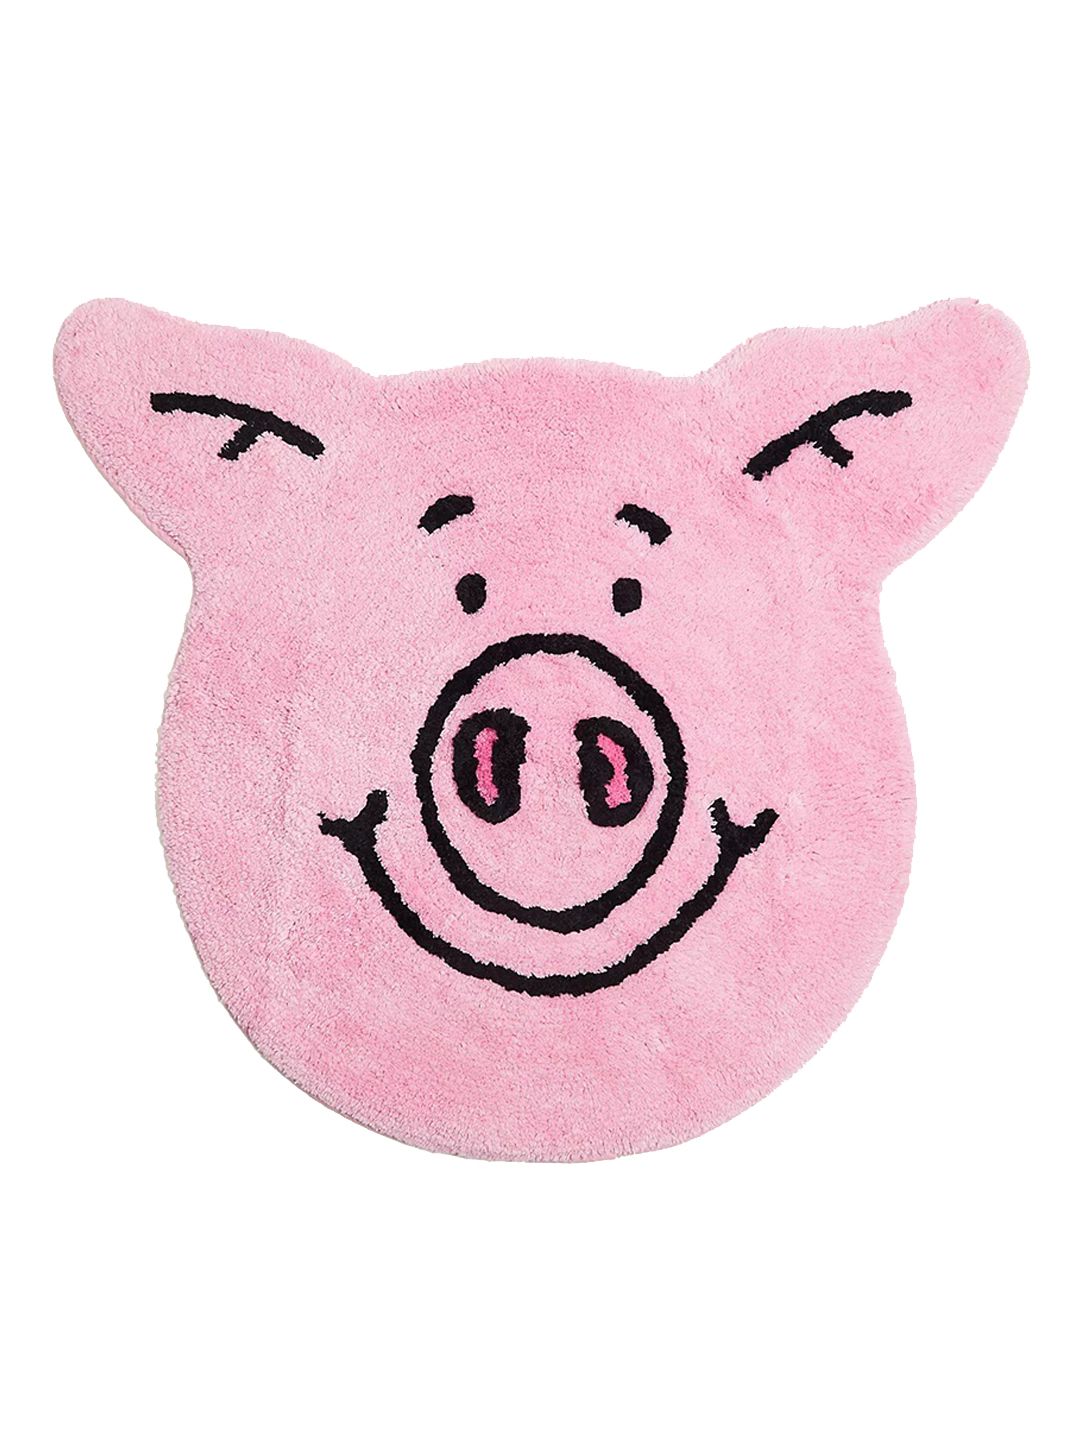 Marks & Spencer Unisex Pink Printed Bath Rugs Price in India